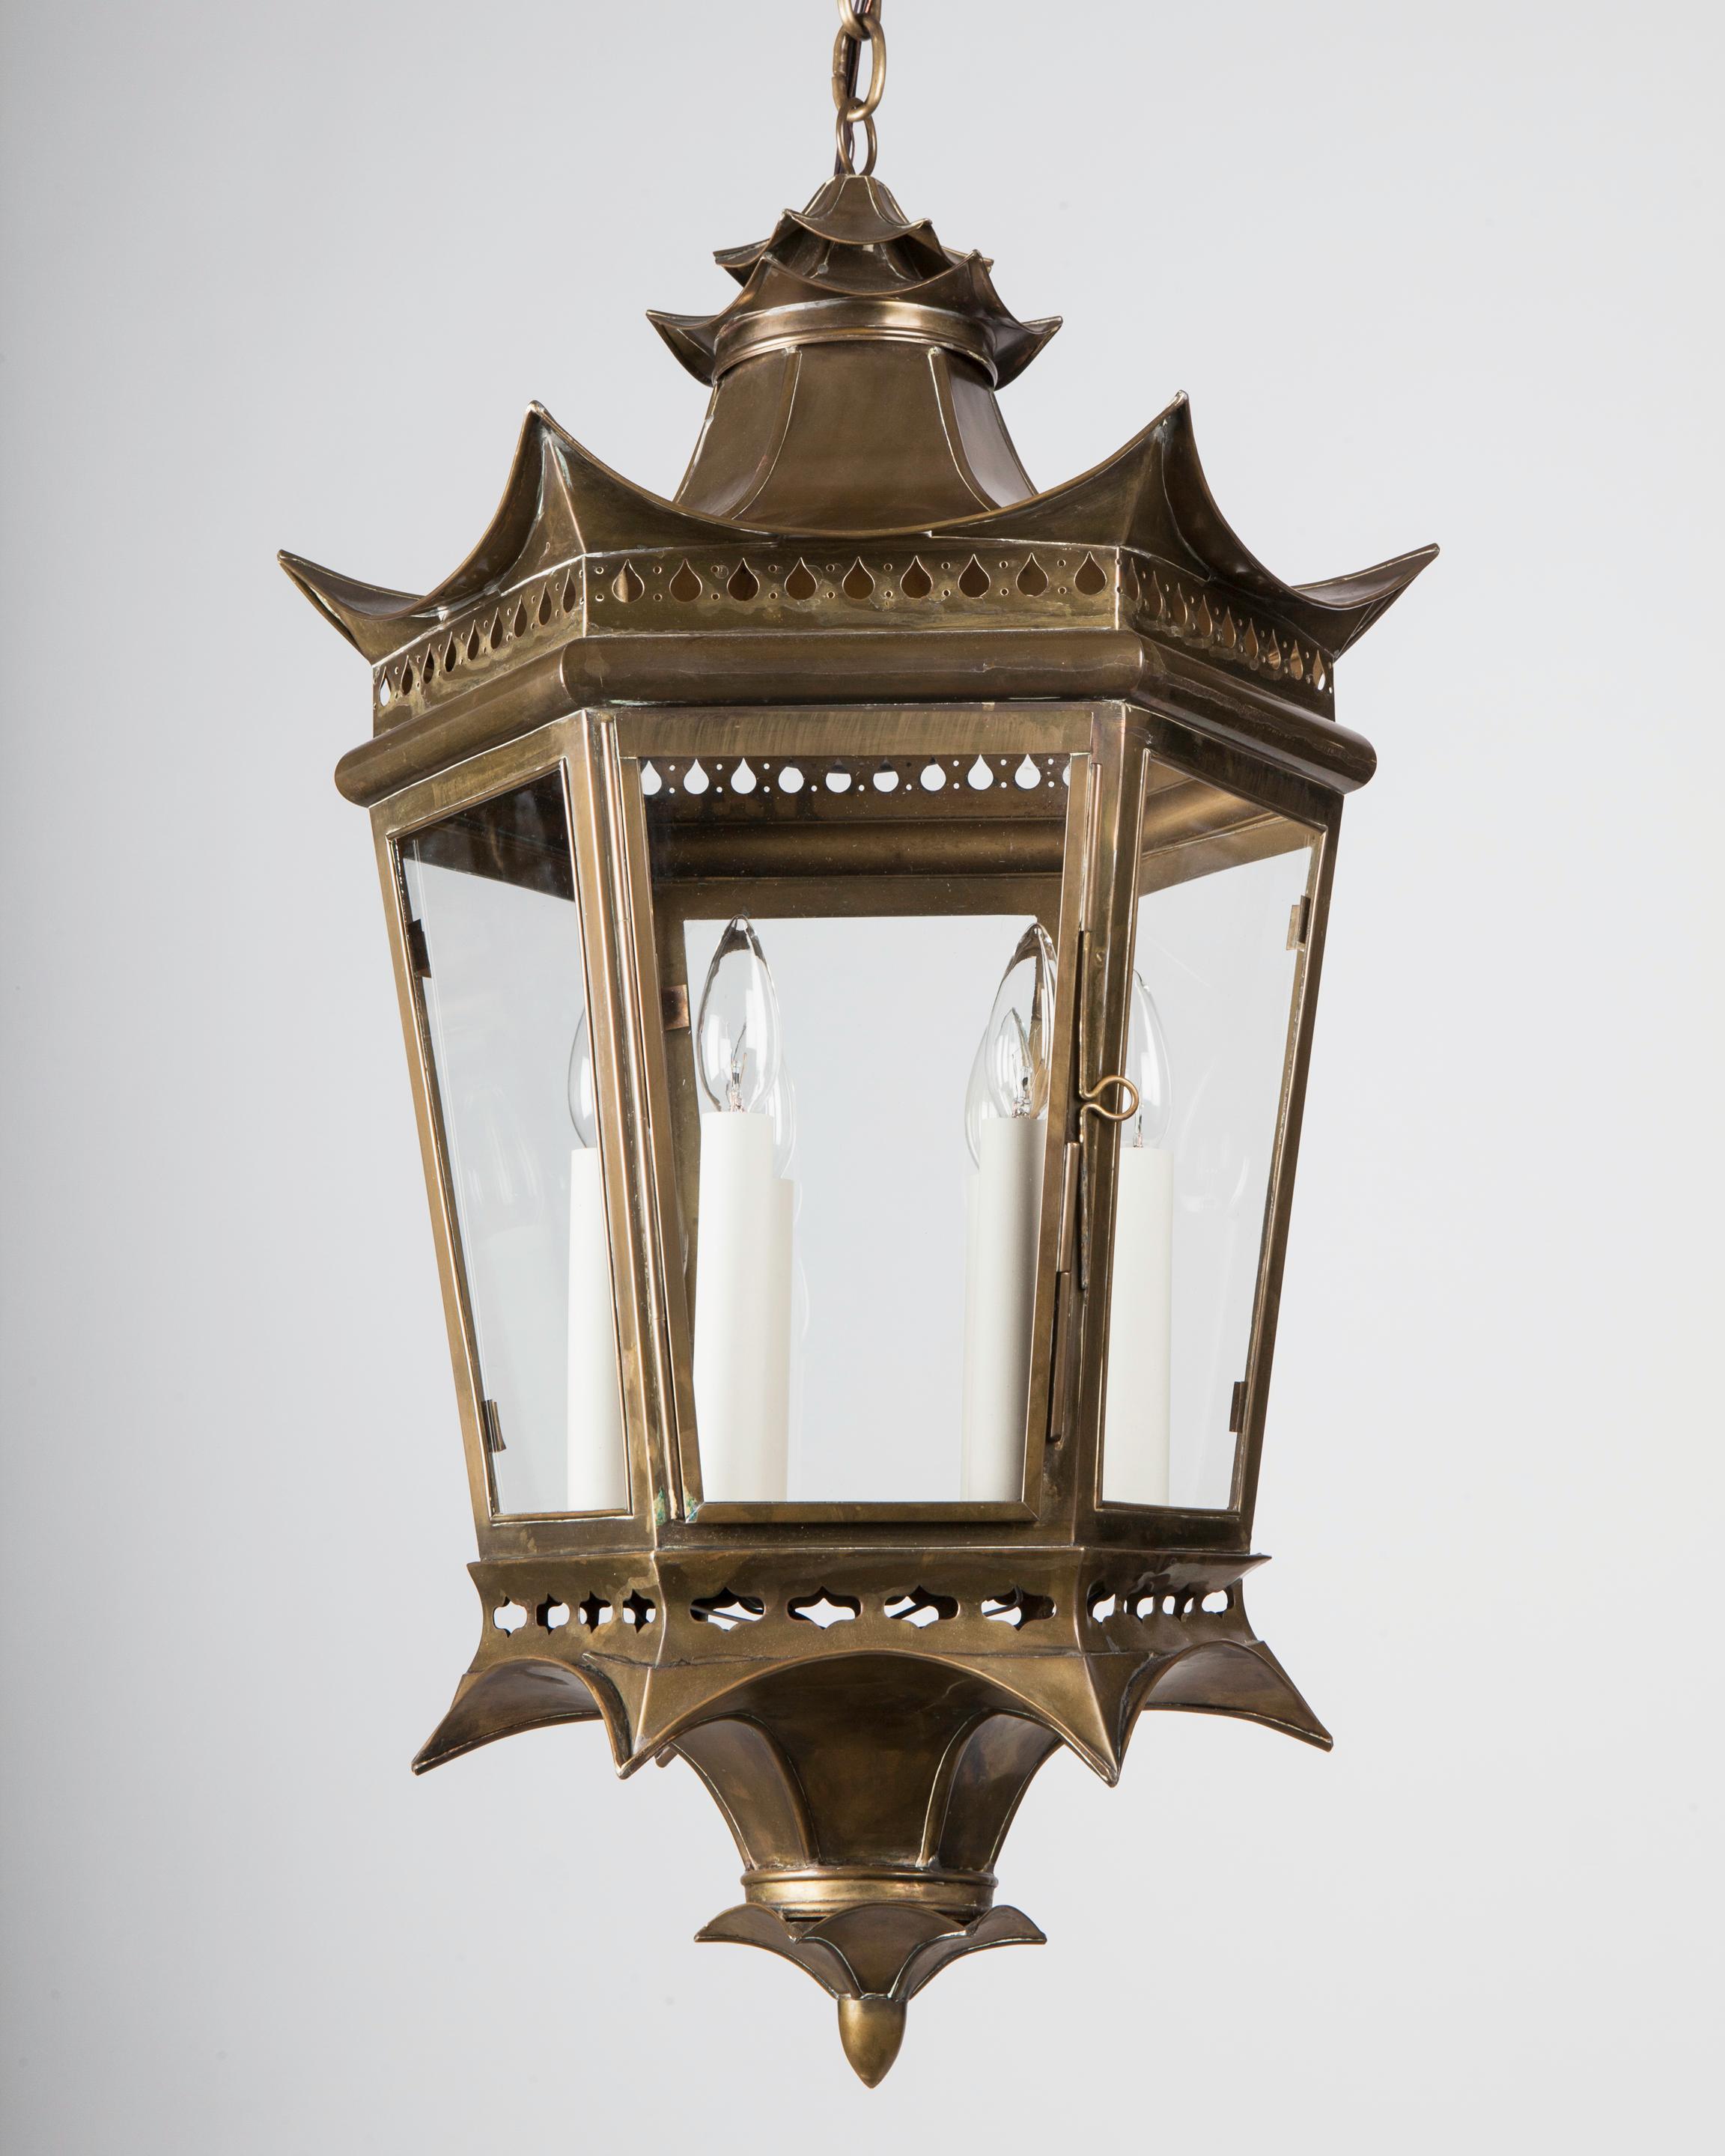 Chinoiserie Vintage Hexagonal Pagoda Form Brass Lantern with Pierced Details, Circa 1940s For Sale